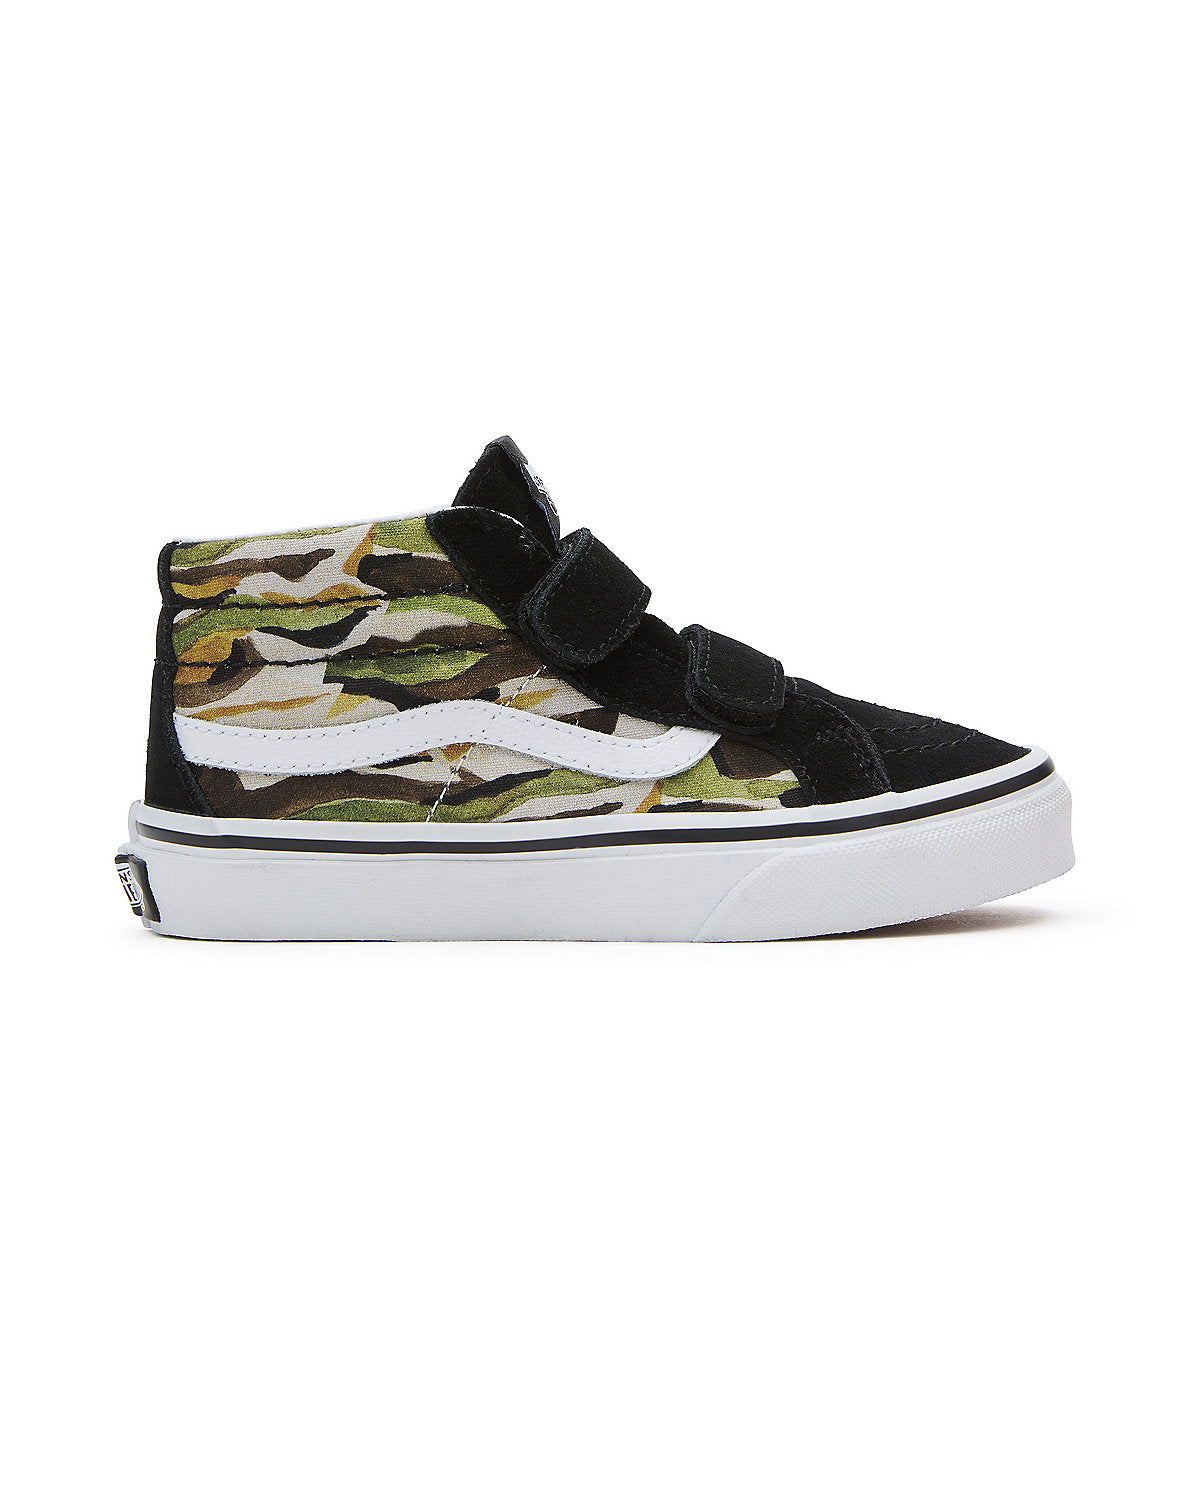 VANS Kids Sk8-Mid Reissue V Painted Camo Trainers - Green